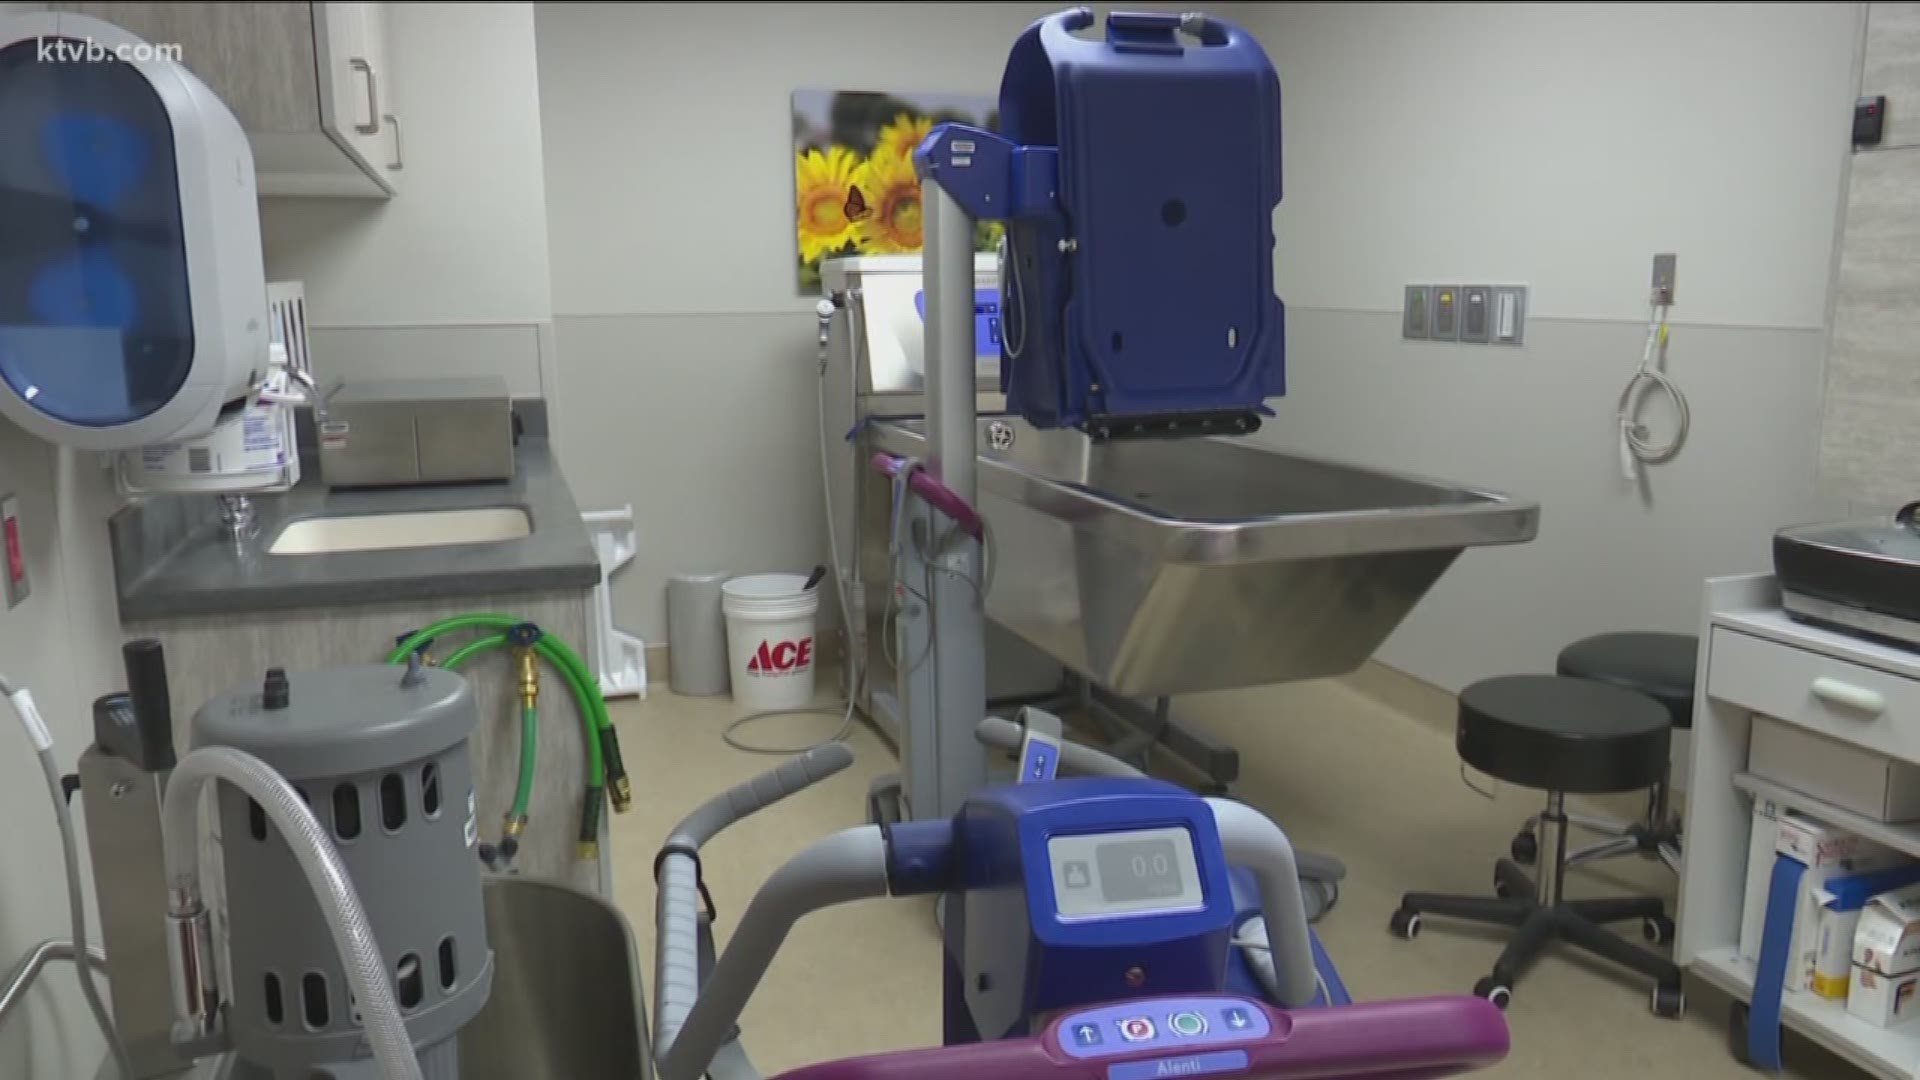 Up until now, burn victims in Idaho had to go out of state for treatment.